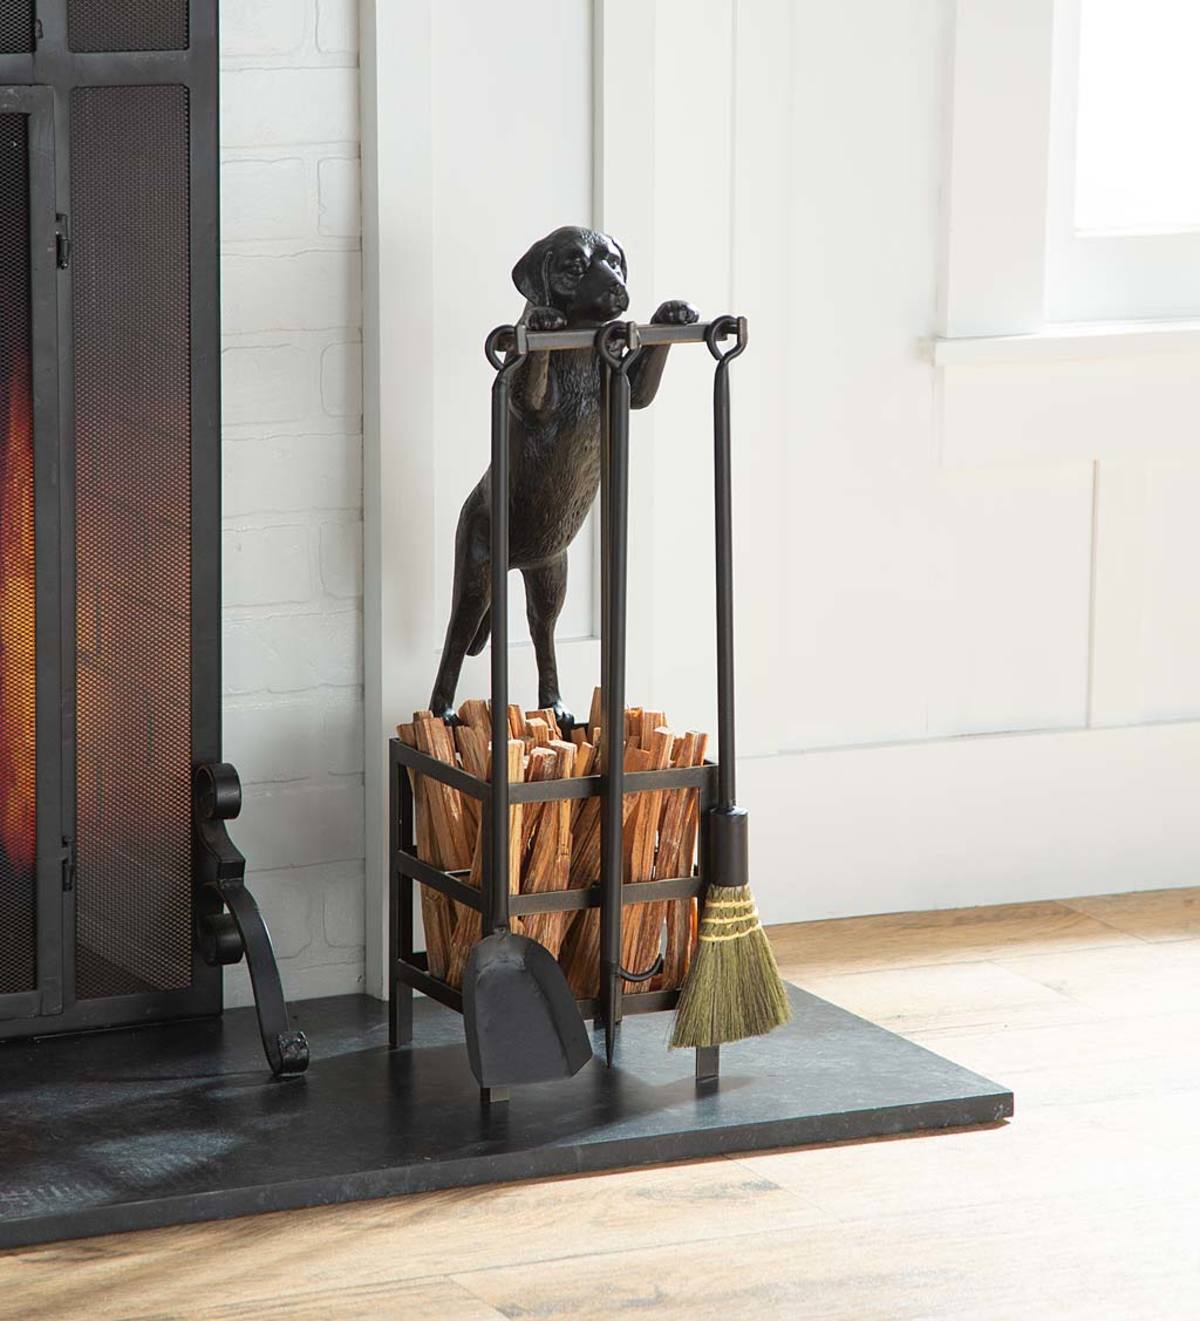 Labrador Puppy Fireplace 3 Piece Tool Set With Fatwood Storage Space Plowhearth